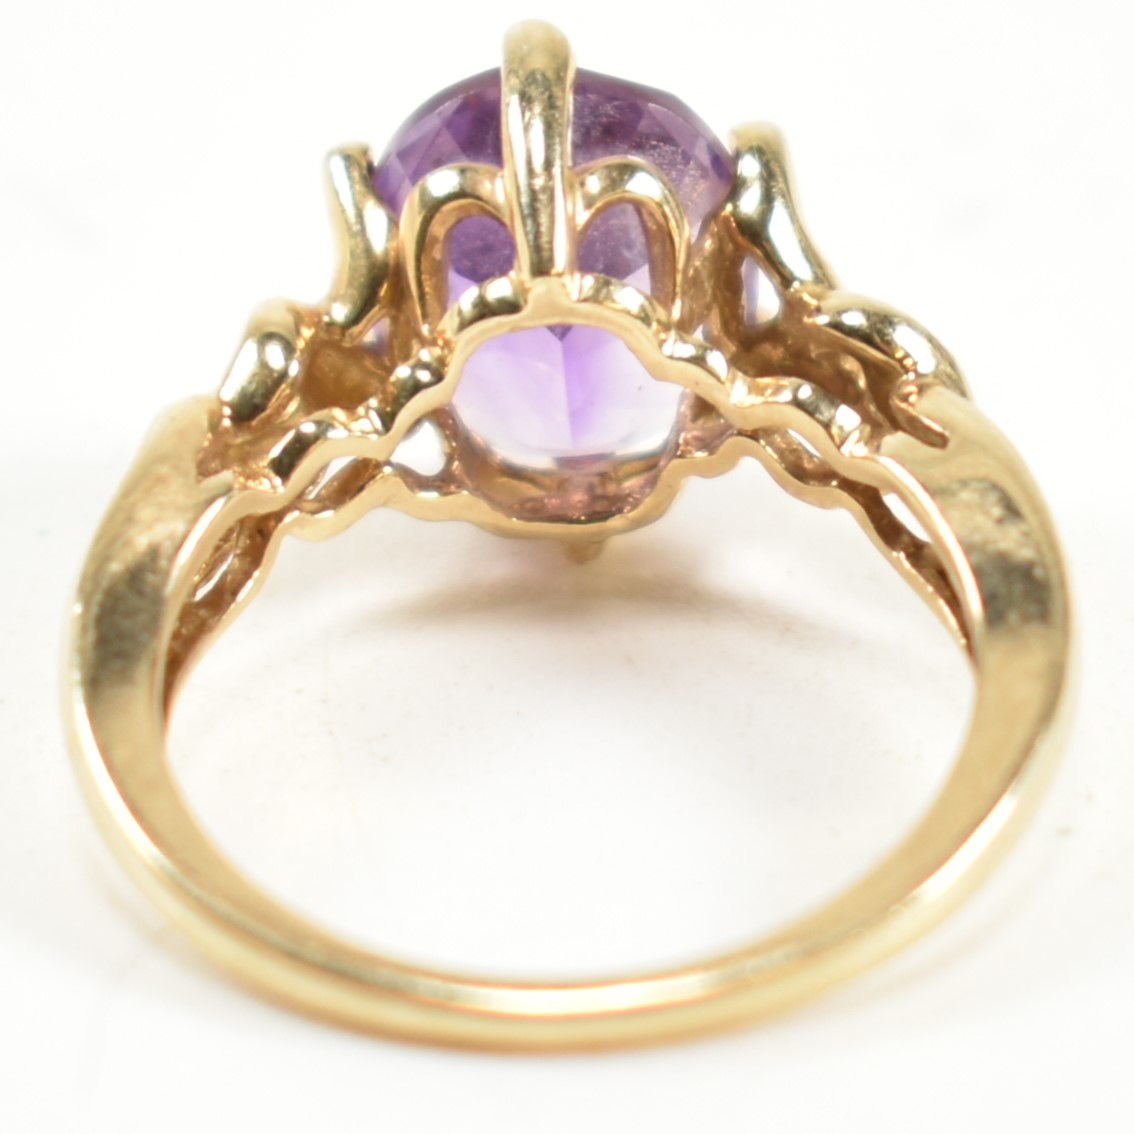 HALLMARKED 9CT GOLD & AMETHYST RING - Image 3 of 9